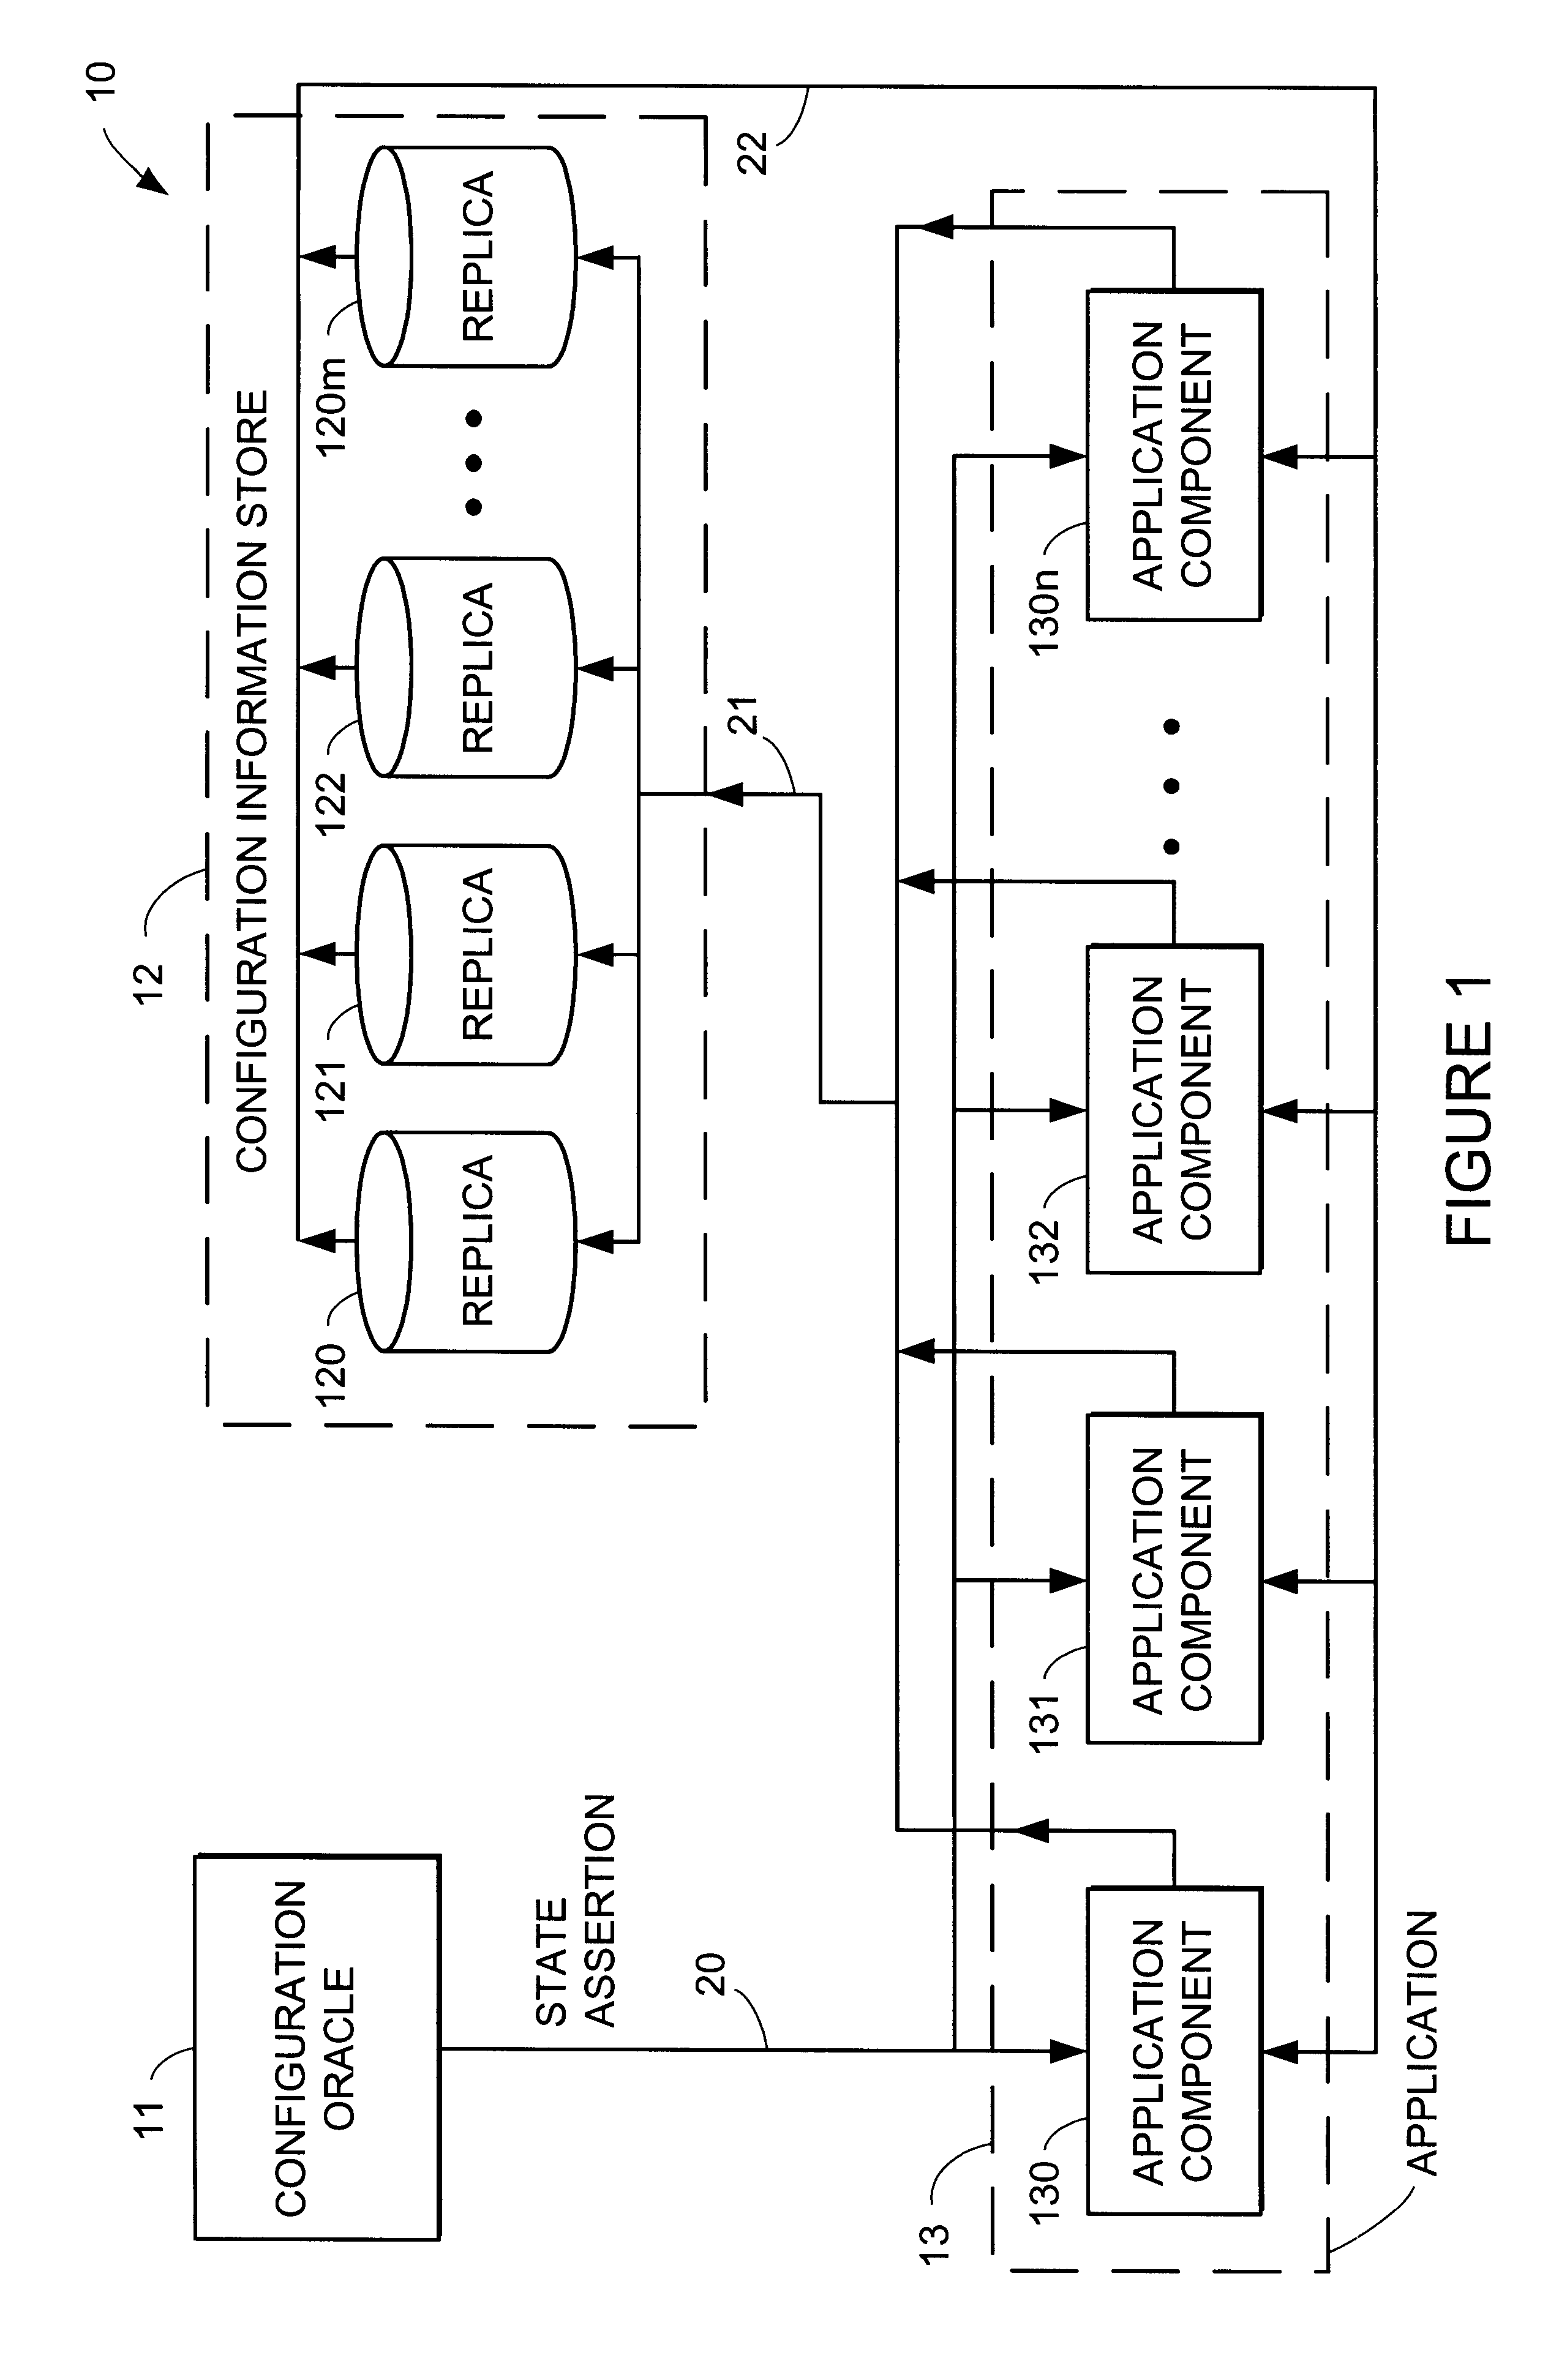 System configuration for multiple component application by asserting repeatedly predetermined state from initiator without any control, and configuration engine causes component to move to predetermined state